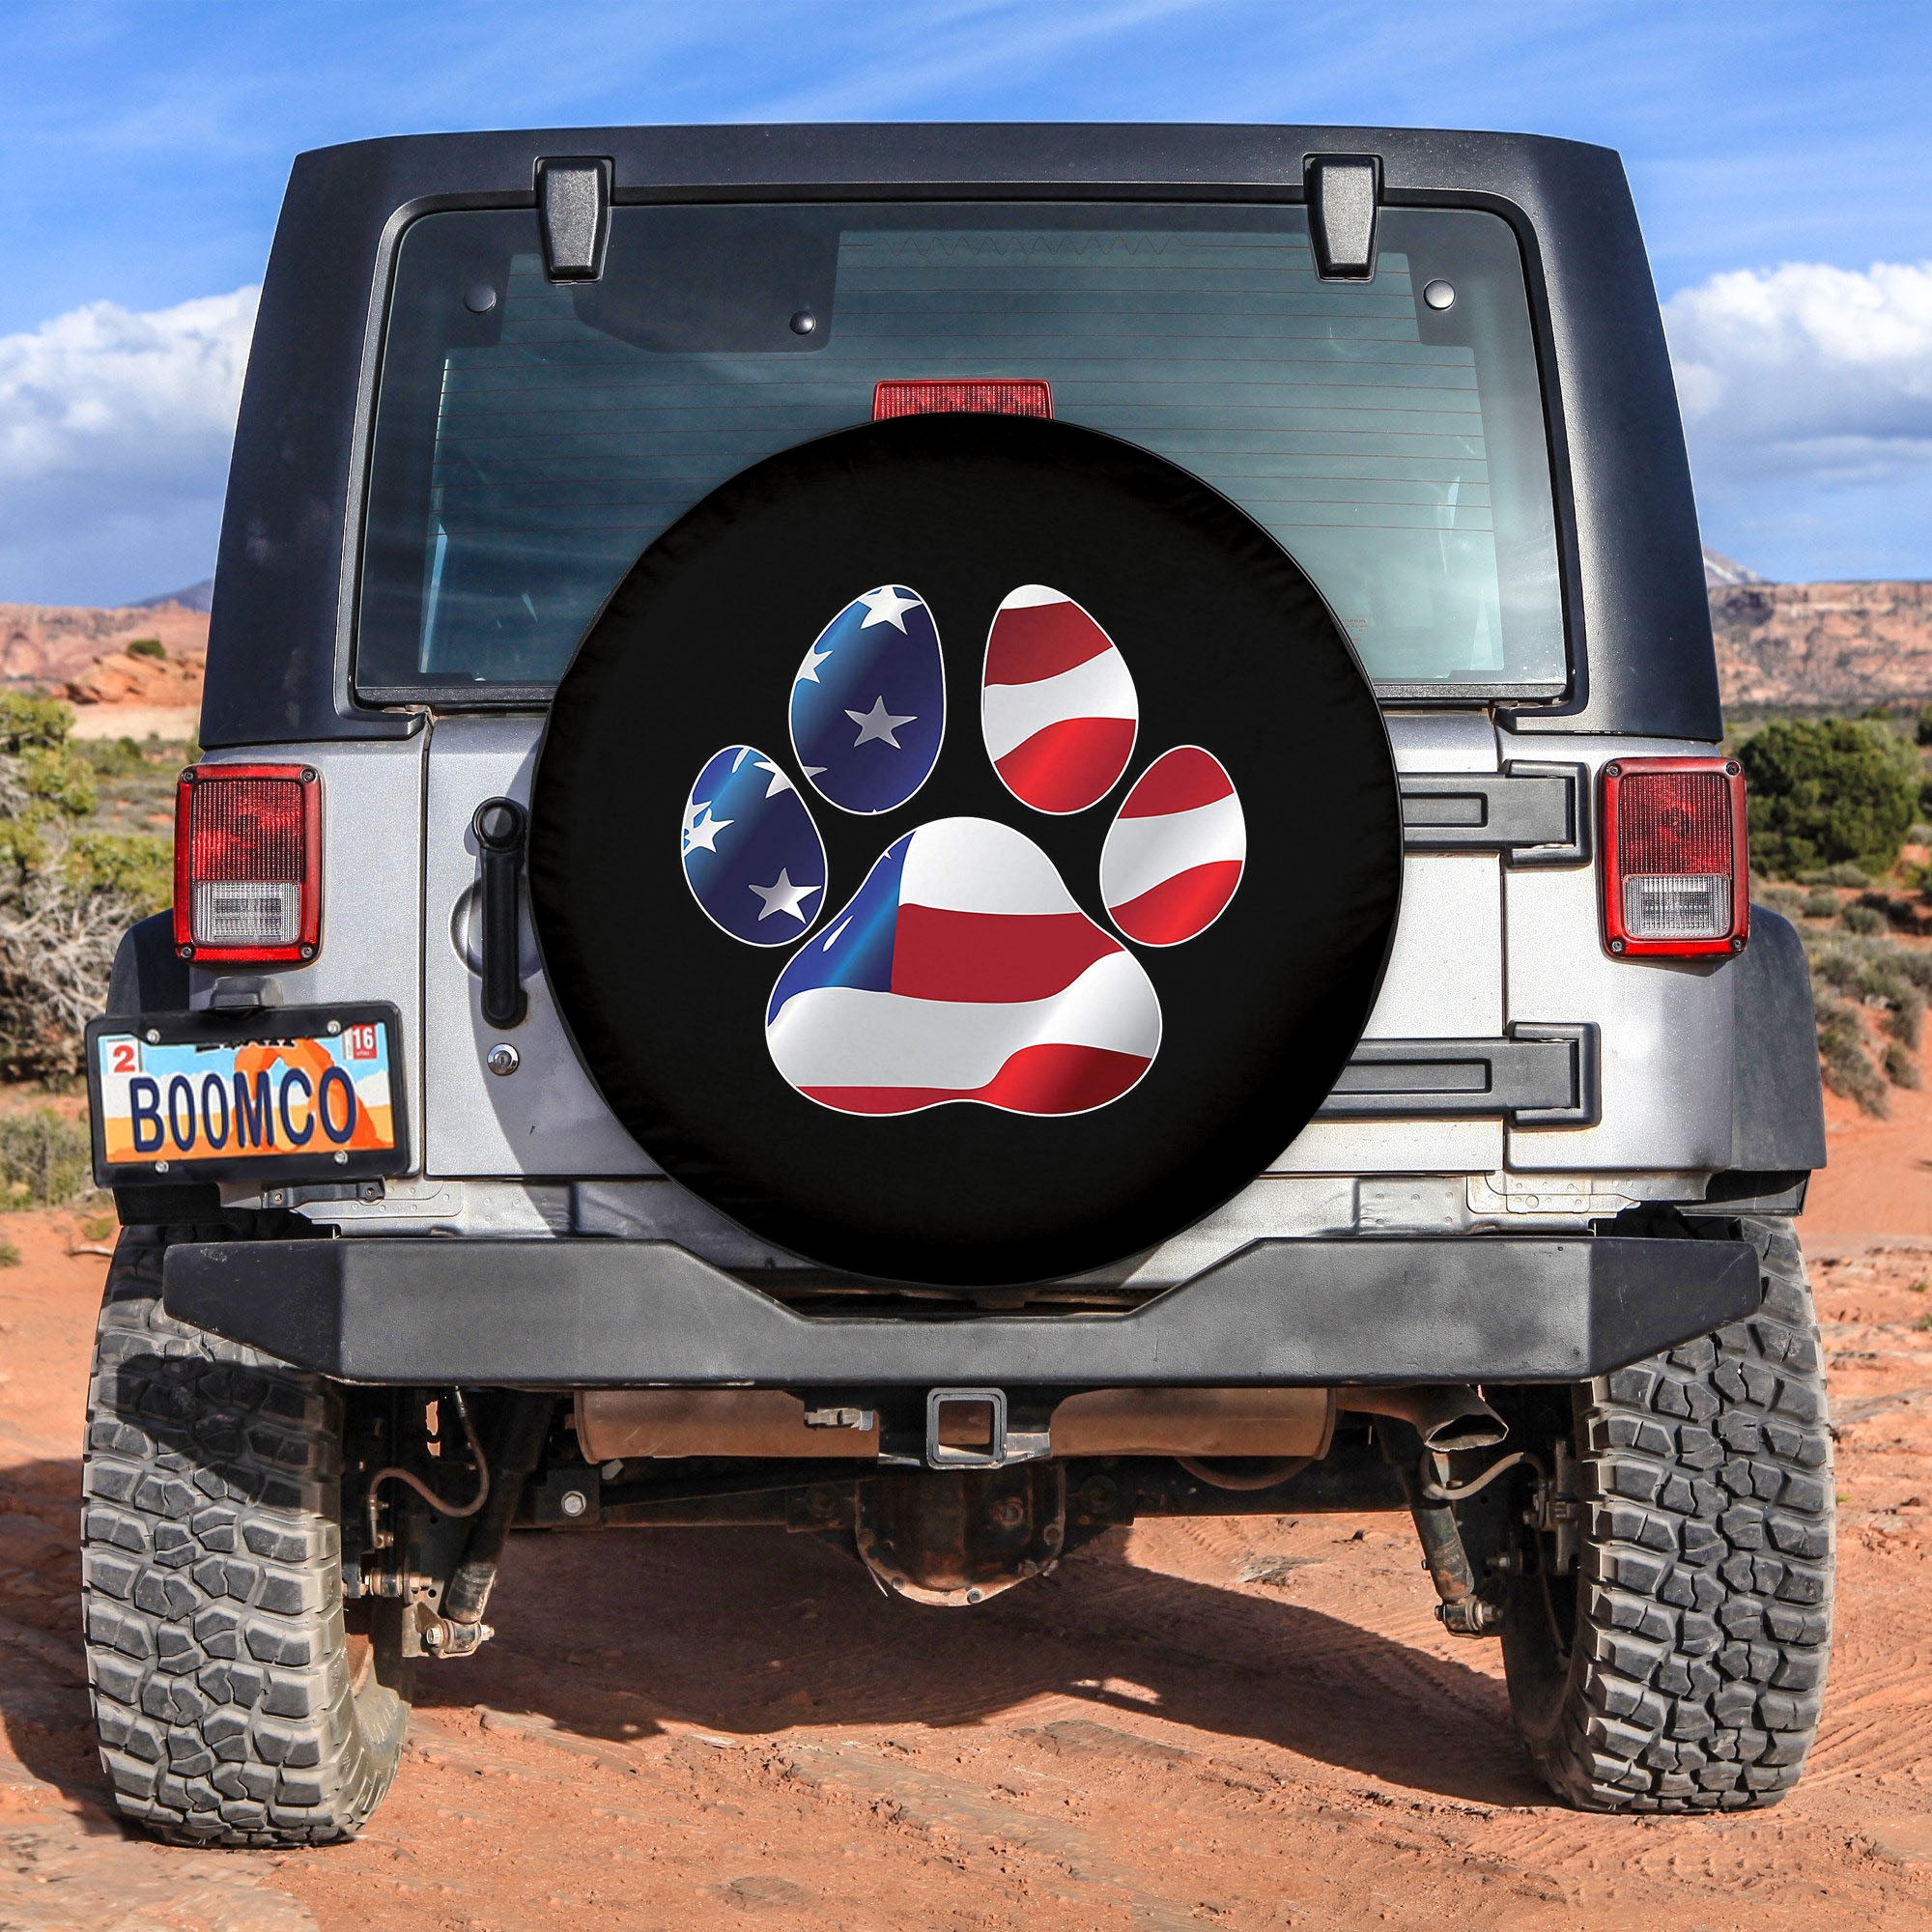 Tire Cover Central Paws US American Flag Spare Tire Cover Gift For Campers Nearkii